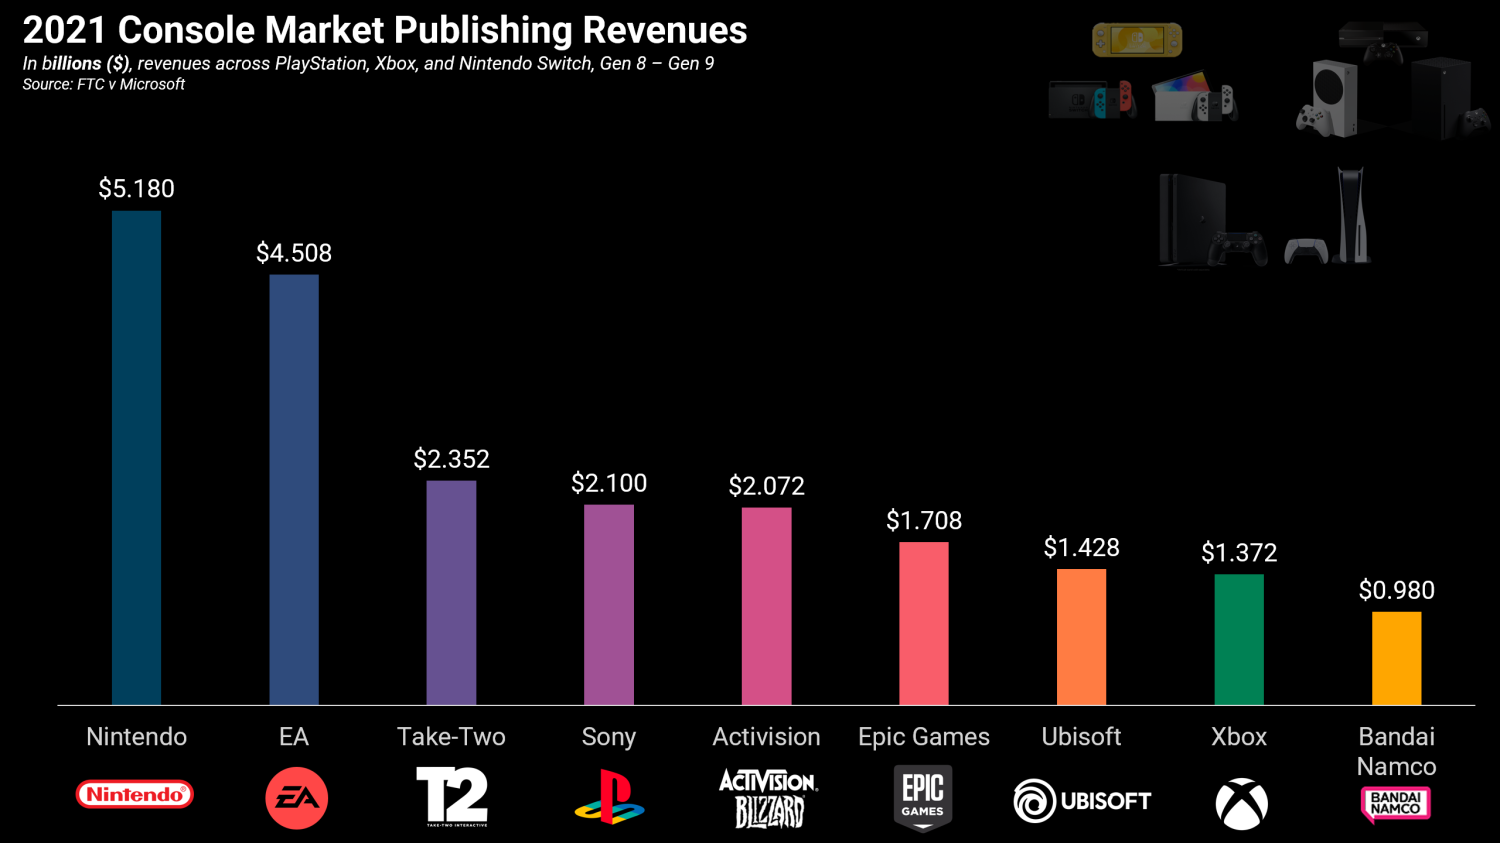 92161_2021_nintendo-conquers-console-publishing-revenues-beats-sony-by-3-billion-xbox-8_full.png